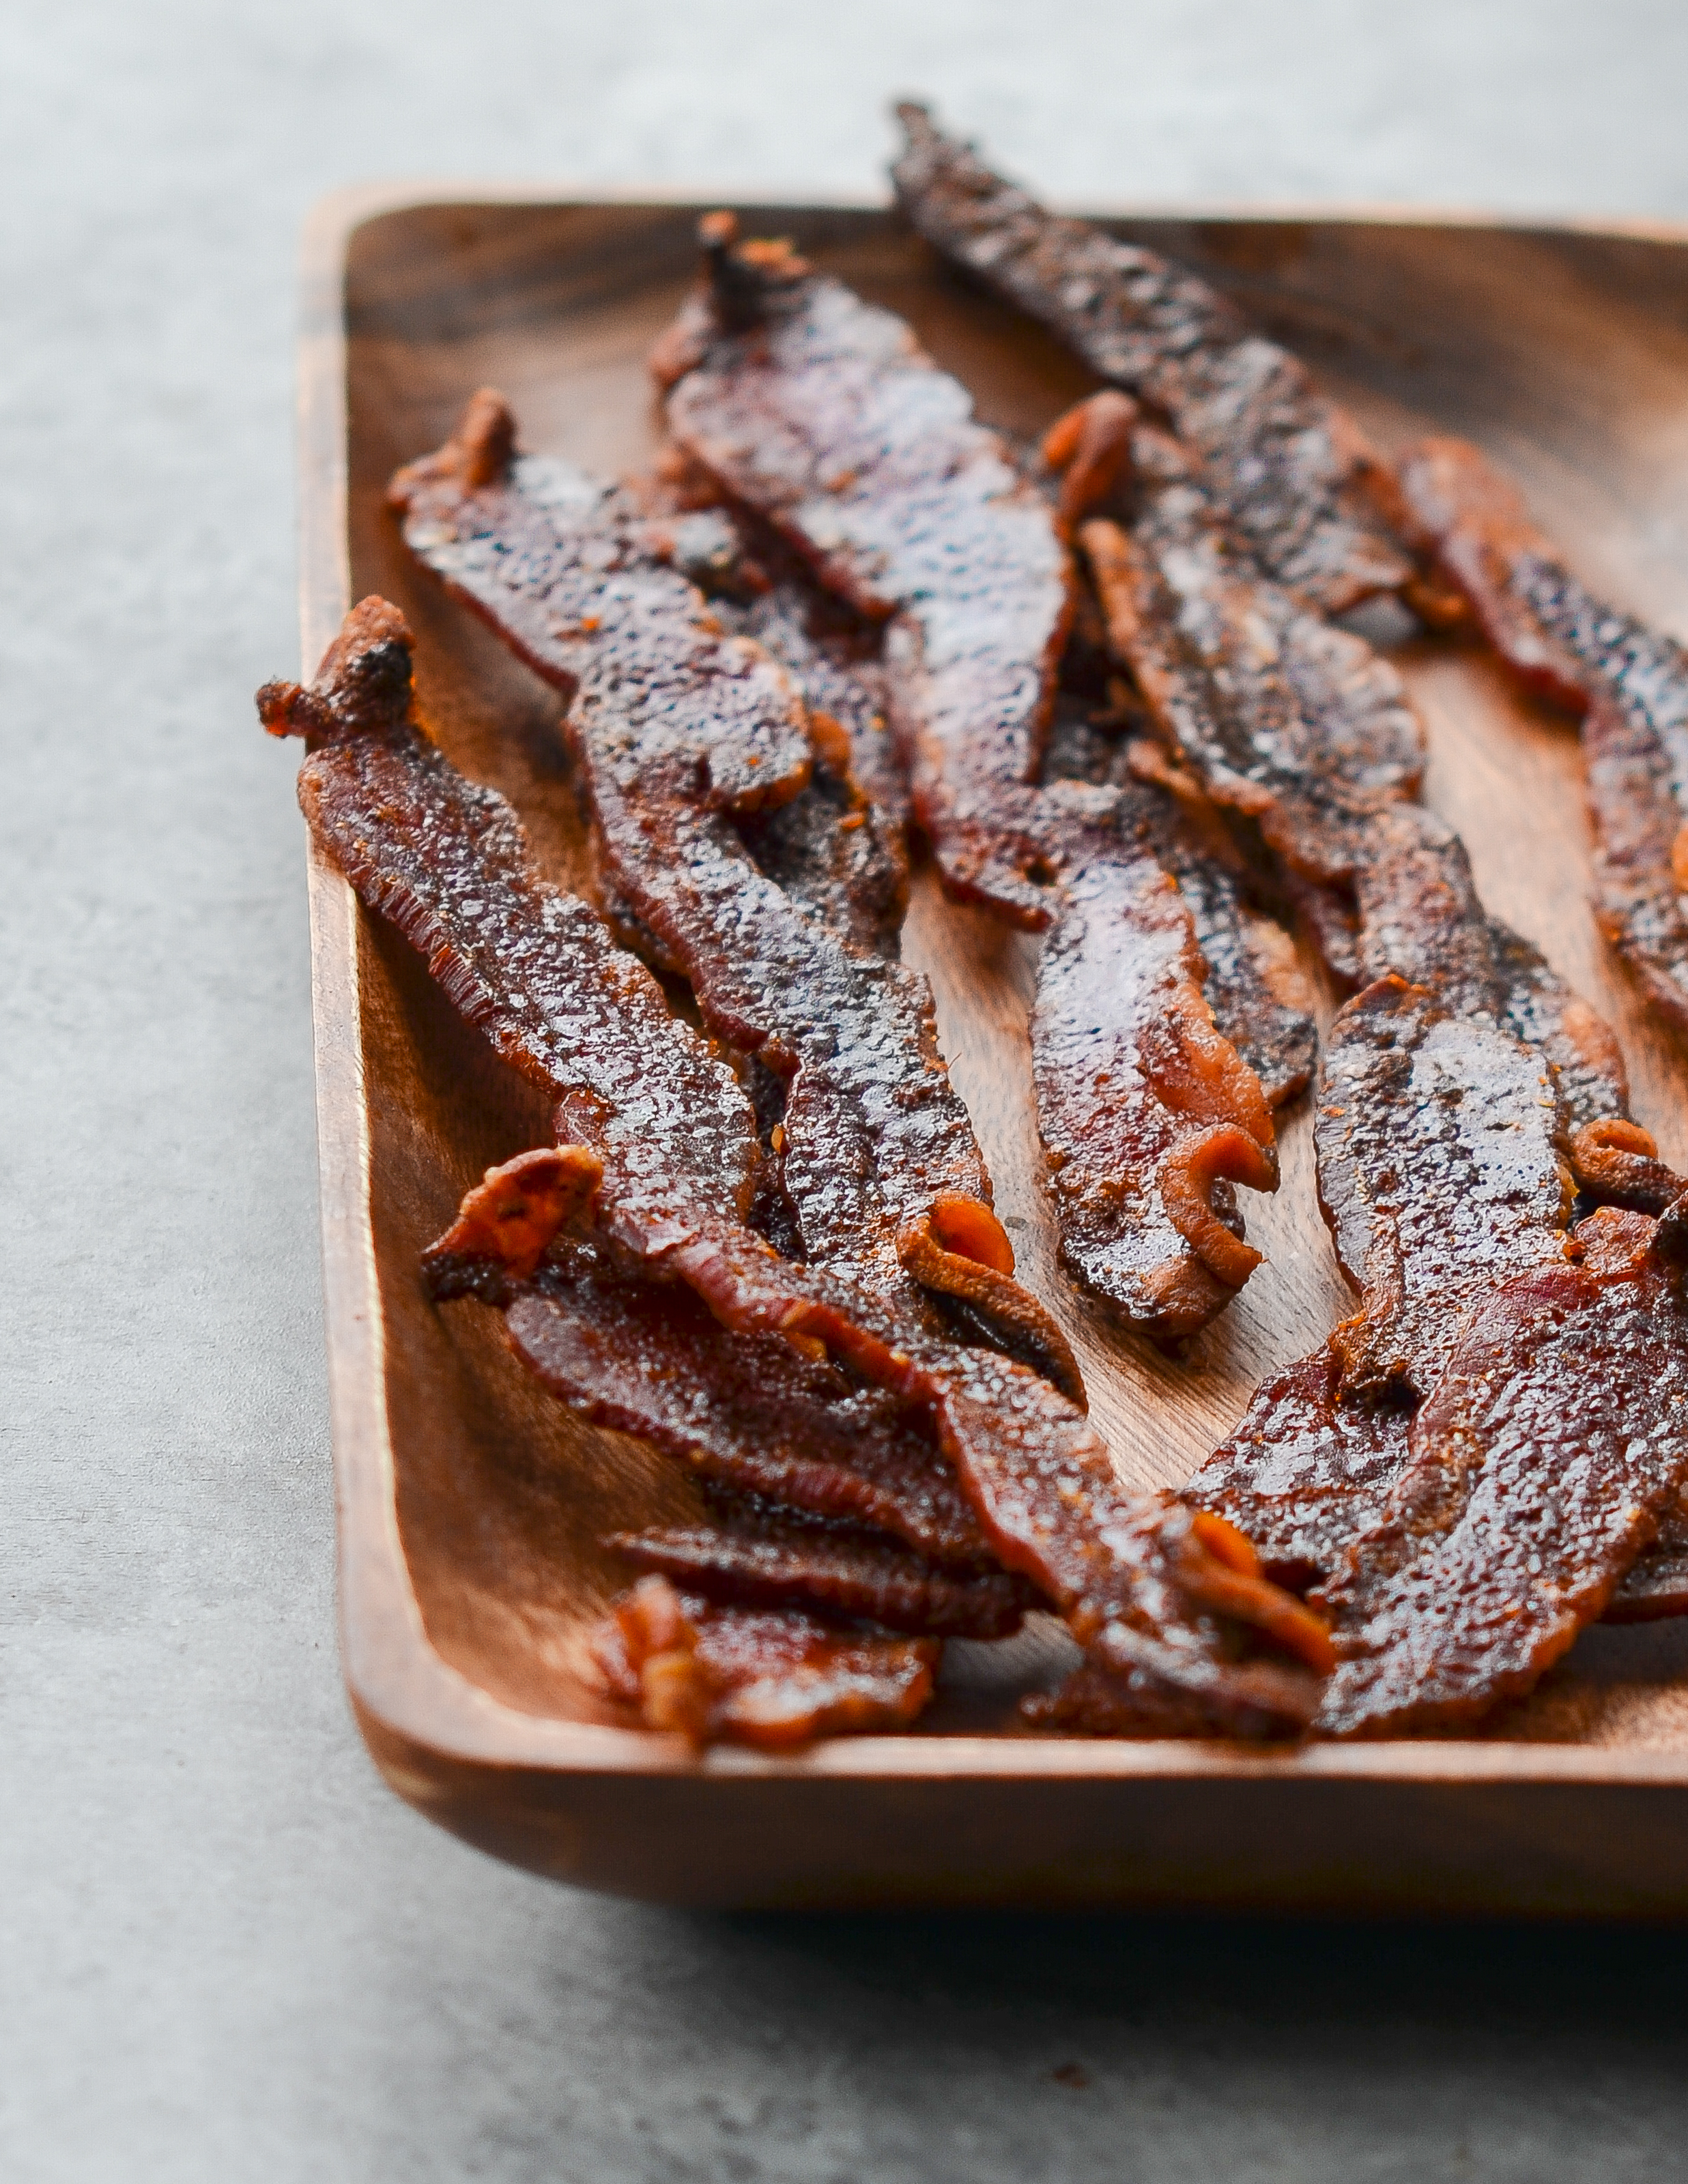 https://www.onceuponachef.com/images/2017/02/Candied-Bacon-8.jpg